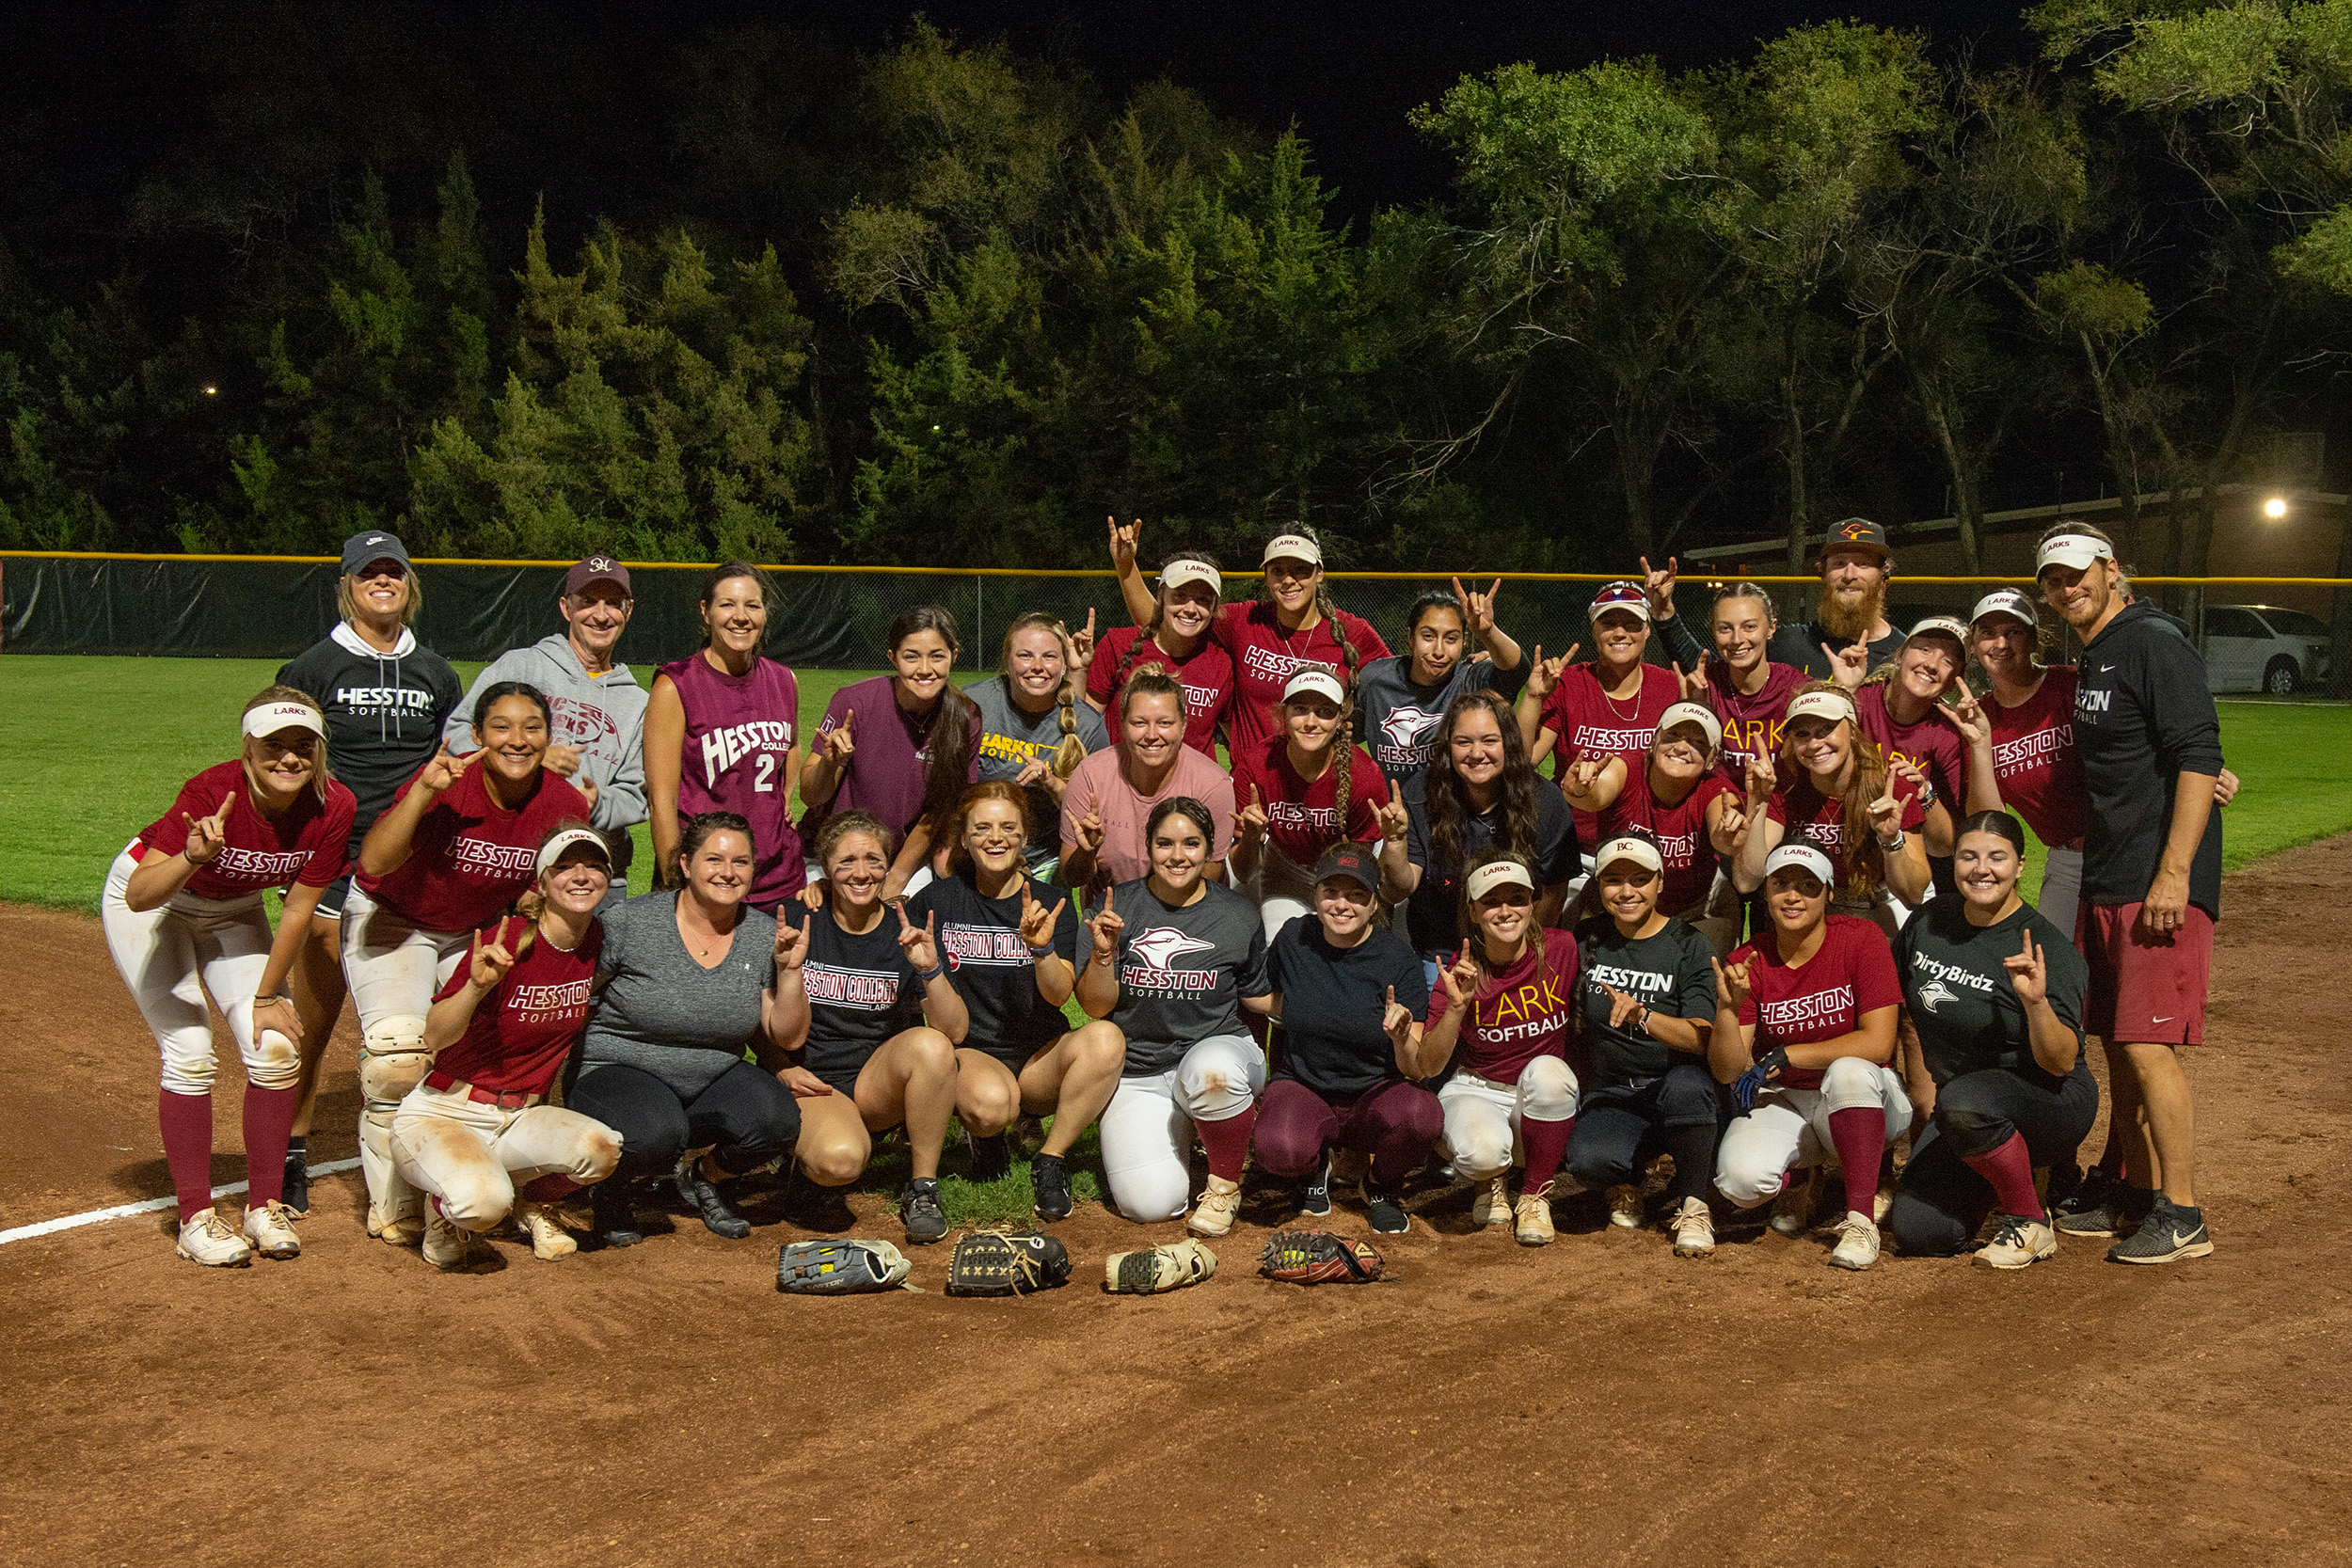 The teams for the alumni vs varsity softball game at Hesston College Homecoming 2022